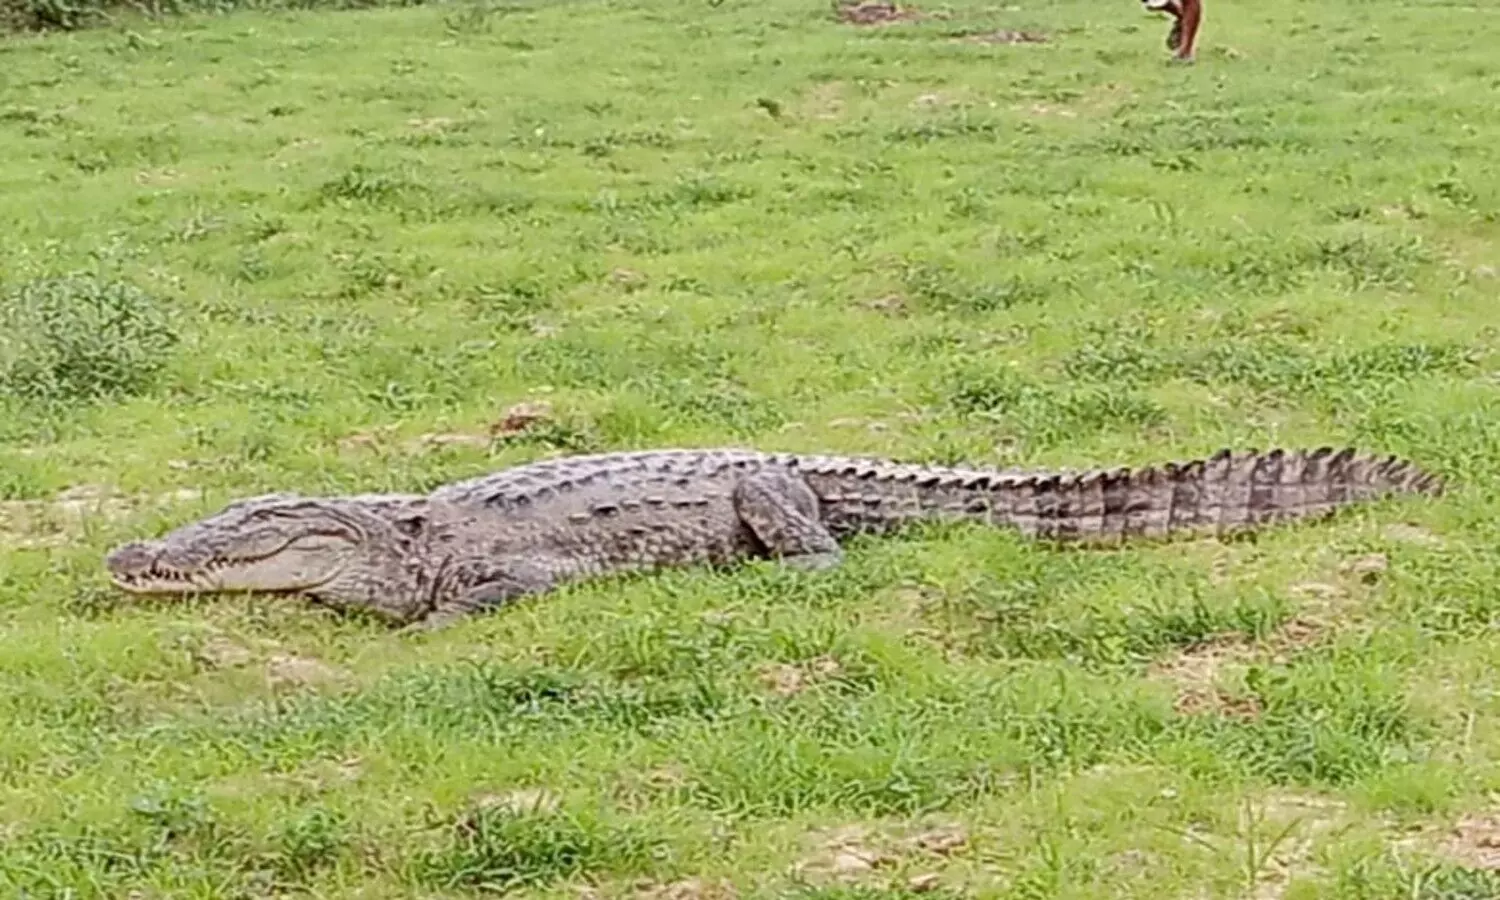 Panic among people due to the arrival of crocodile in Mandata